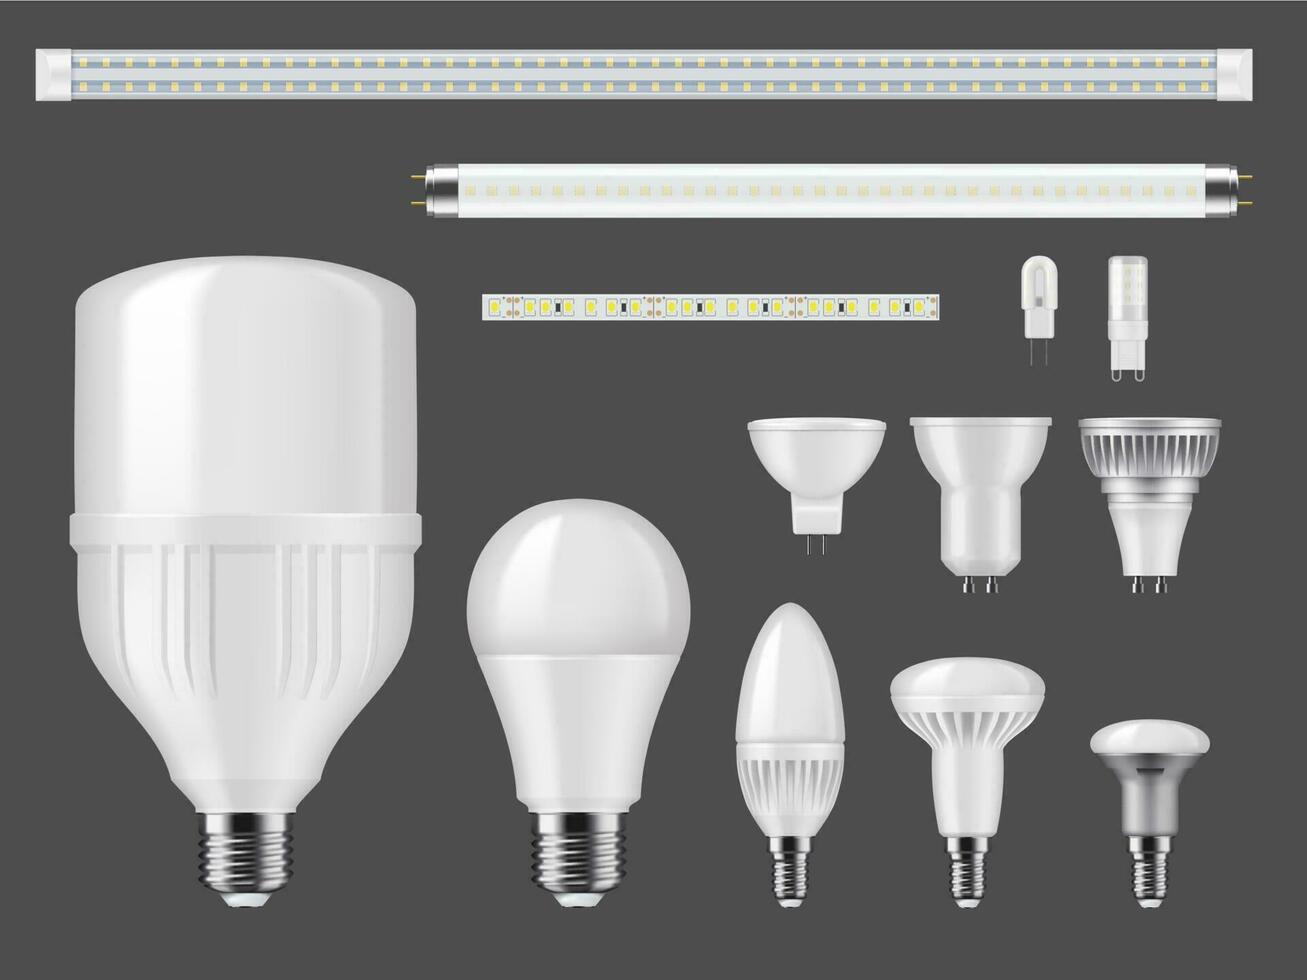 LED bulb lamps, tubes and light strips vector